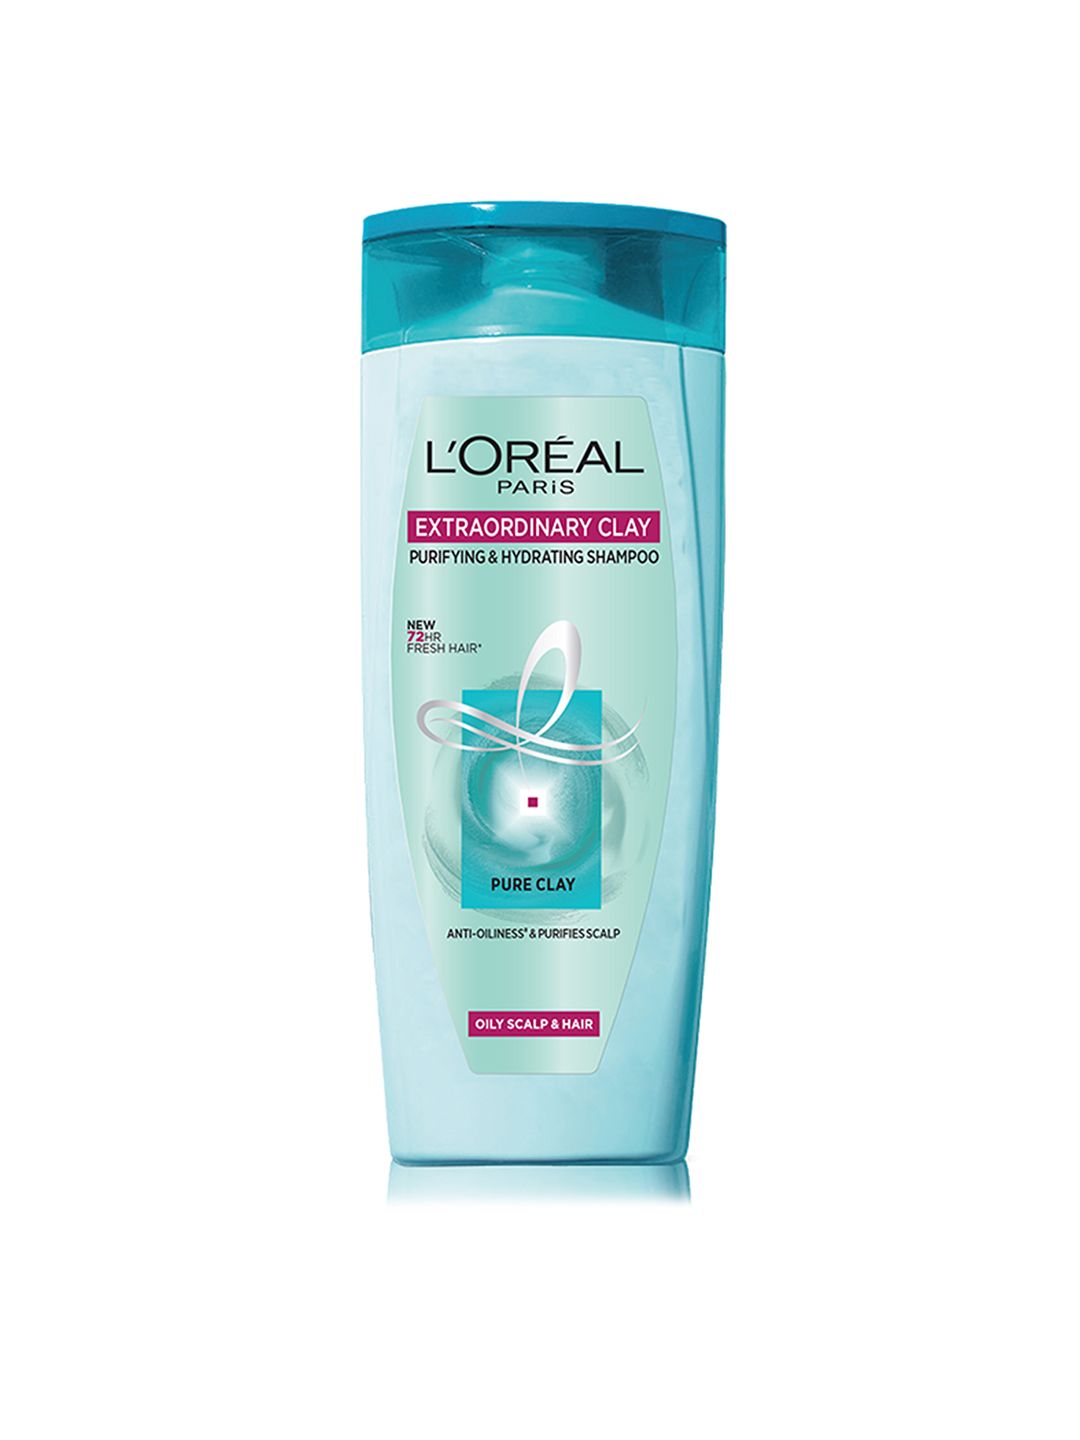 LOreal Paris Unisex Extraordinary Clay Shampoo with Glycerin 175 ml Price in India